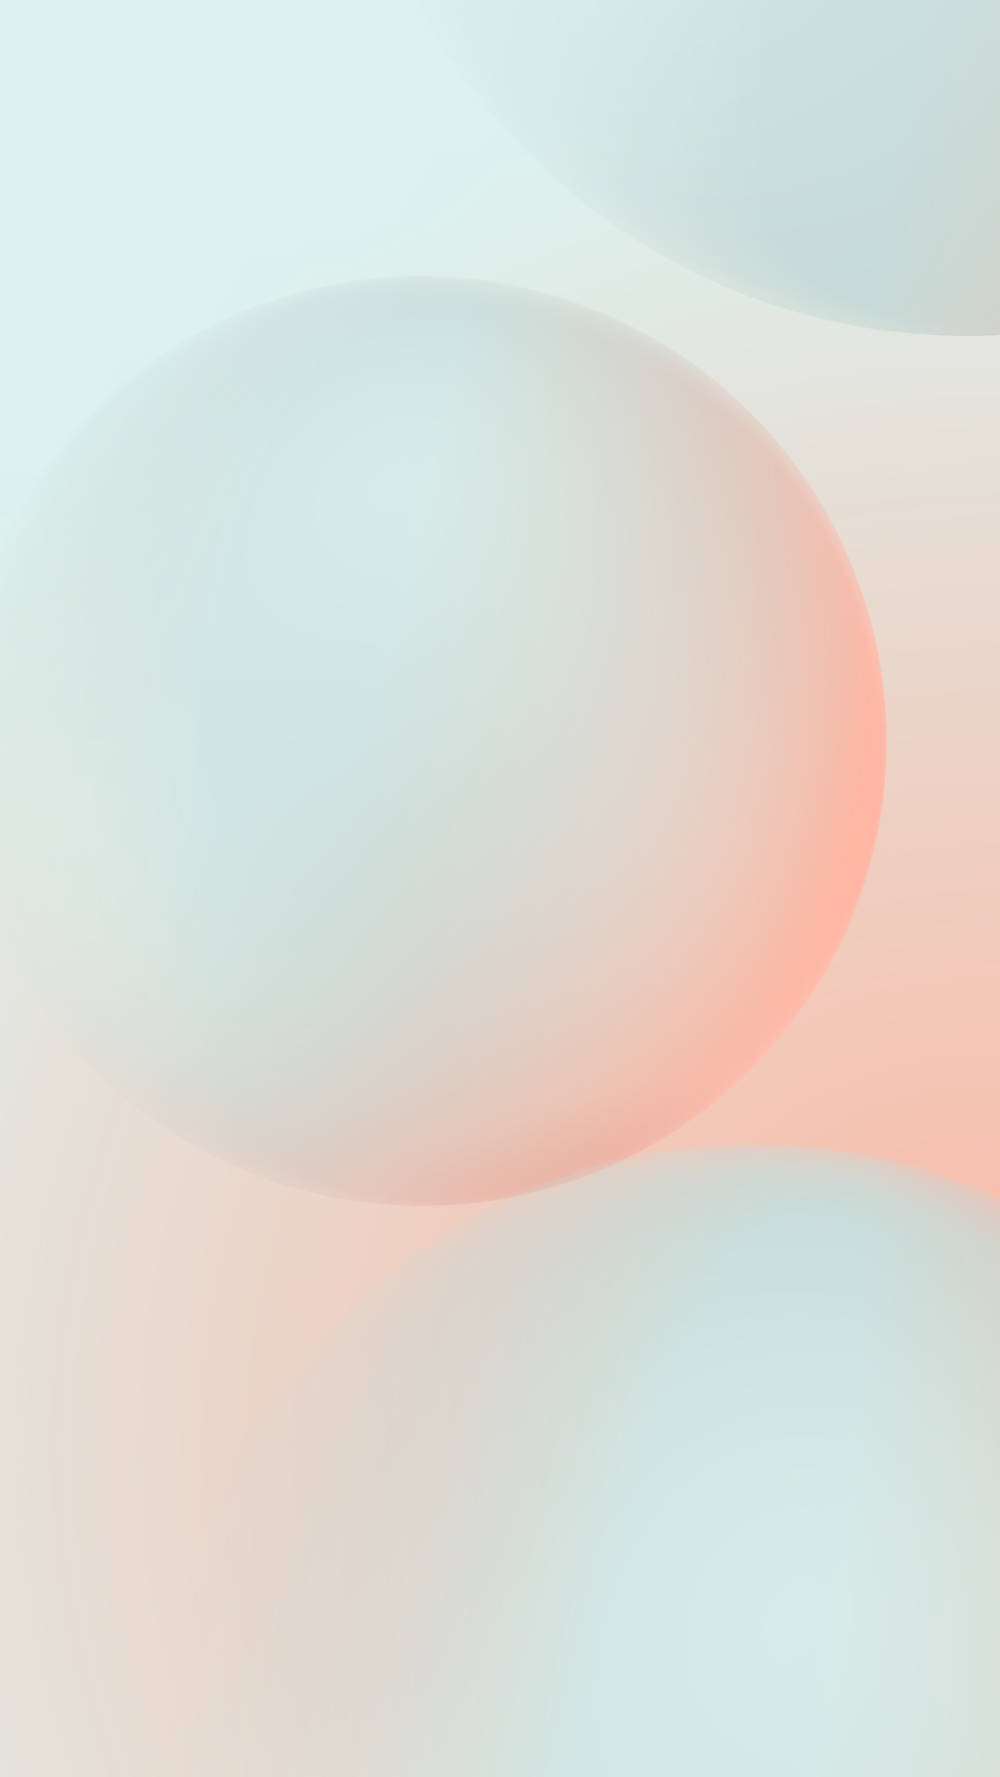 A Pink And White Abstract Background With A Few Circles Background